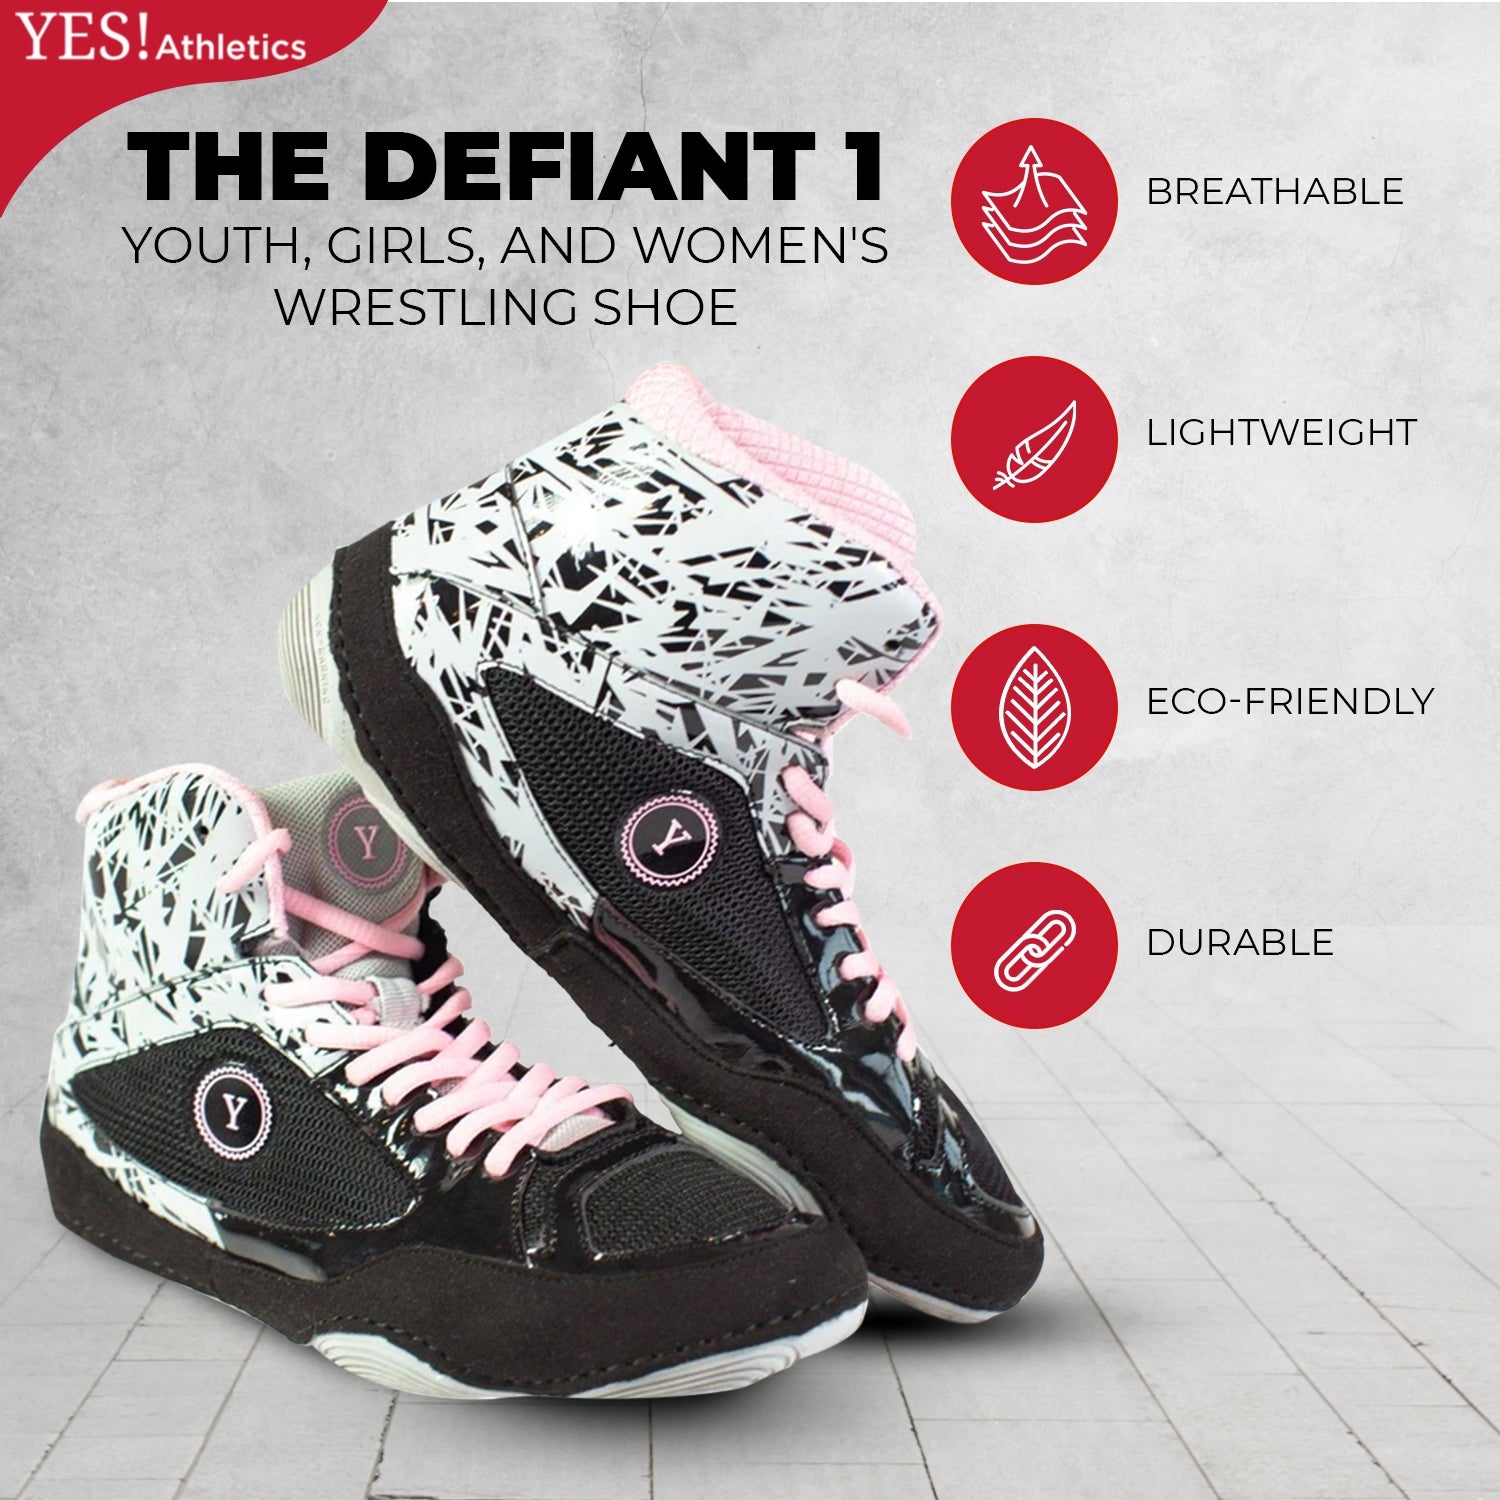 DEFIANT 1 LIQUIDATION - ALL SALES FINAL - Wrestling Shoes for Girls and Women